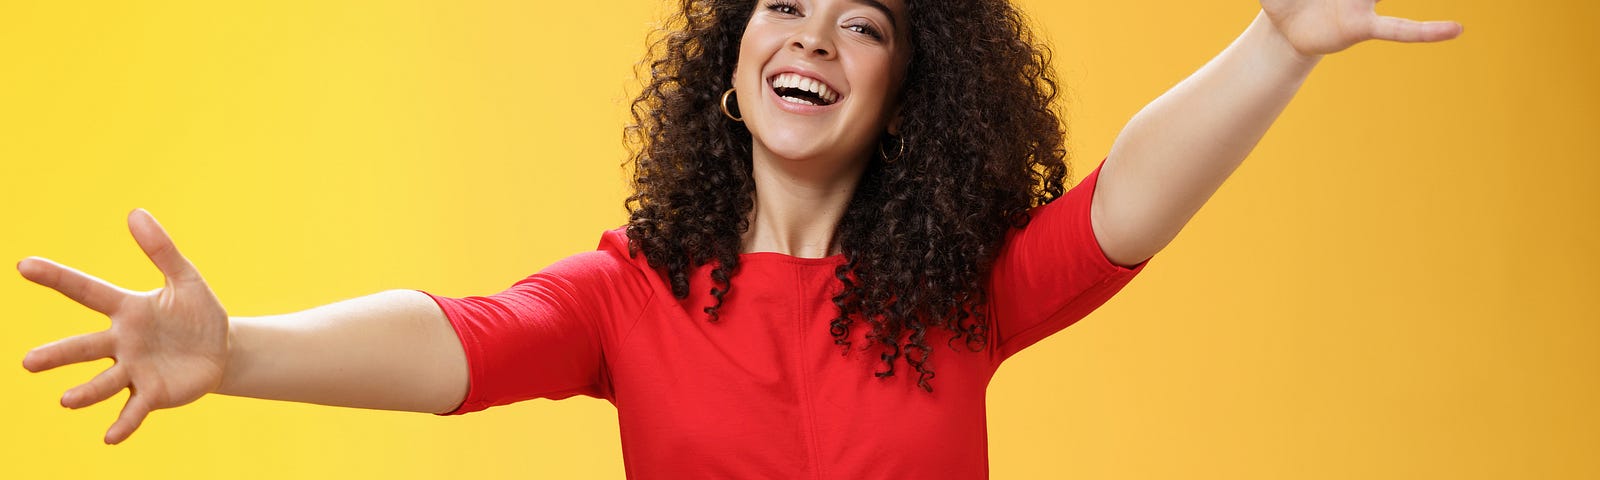 Come into my arms. portrait of friendly and loving, caring charming woman with curly hair in red casual dress spread hands as wanting give hug smiling broadly at camera giving warm